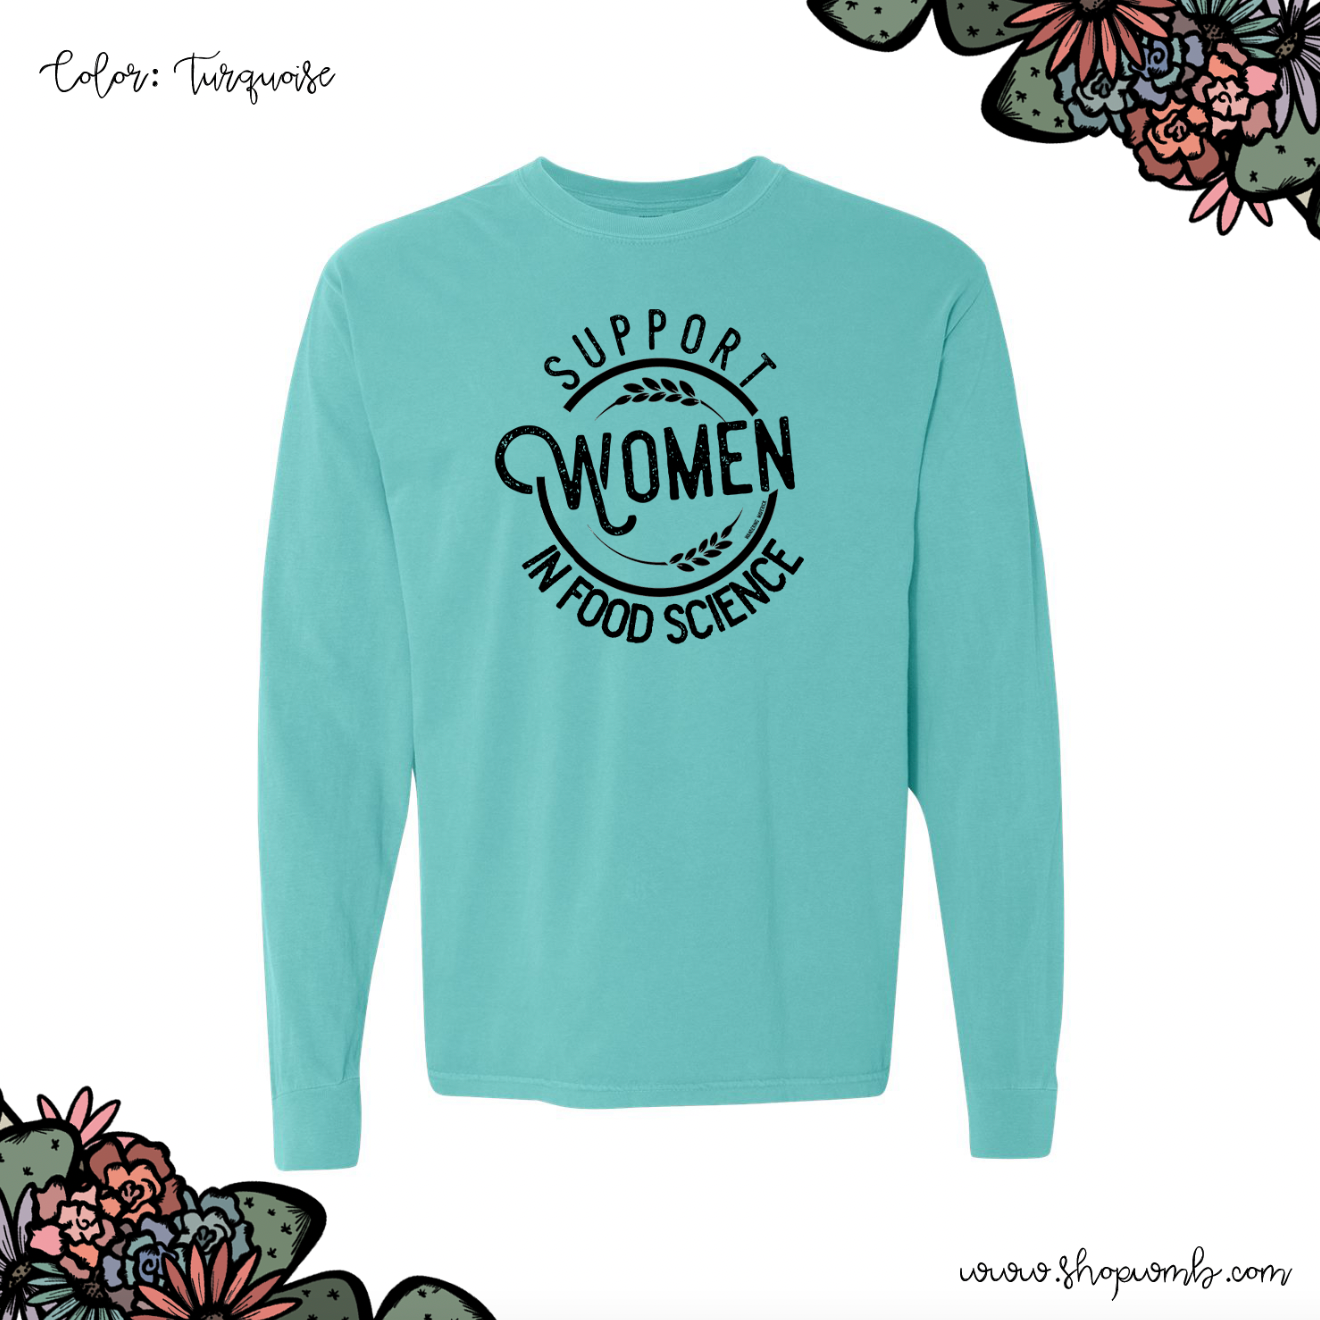 Support Women In Food Science LONG SLEEVE T-Shirt (S-3XL) - Multiple Colors!